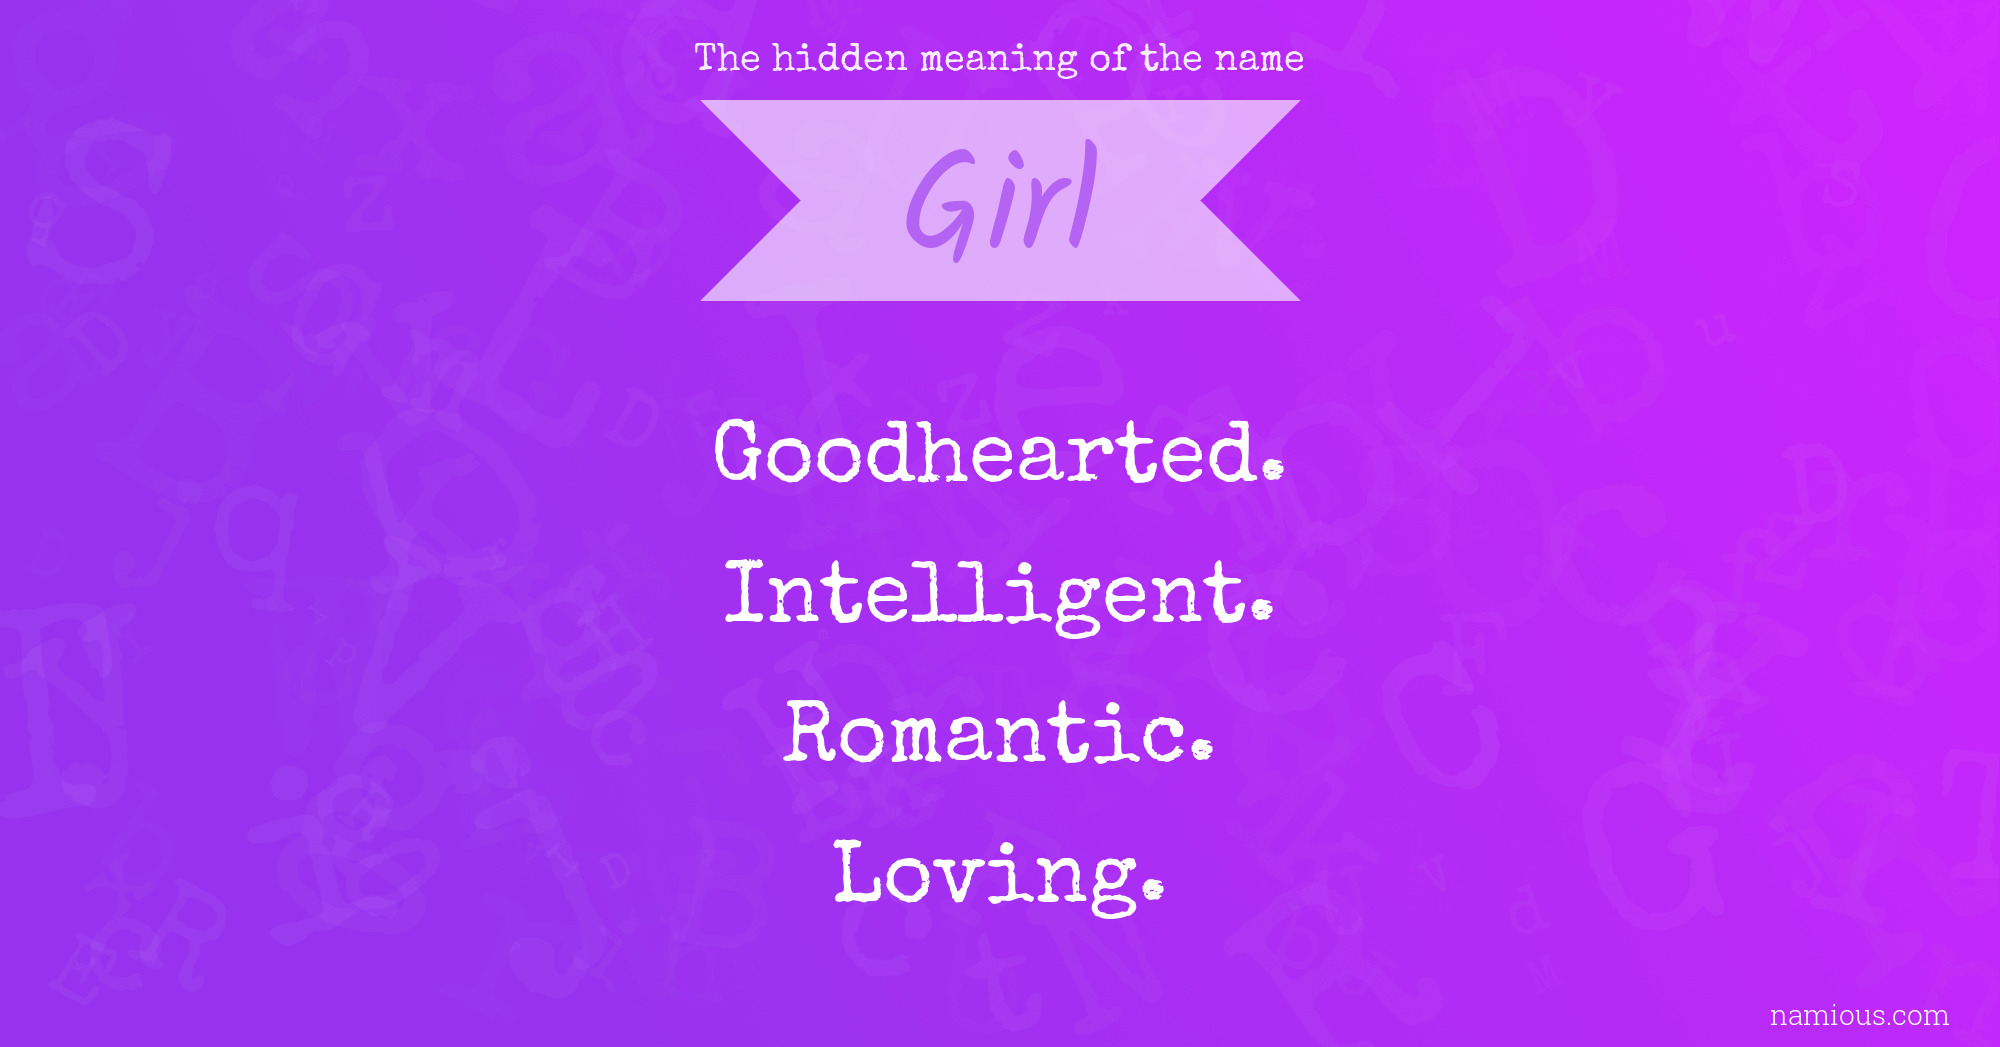 The hidden meaning of the name Girl